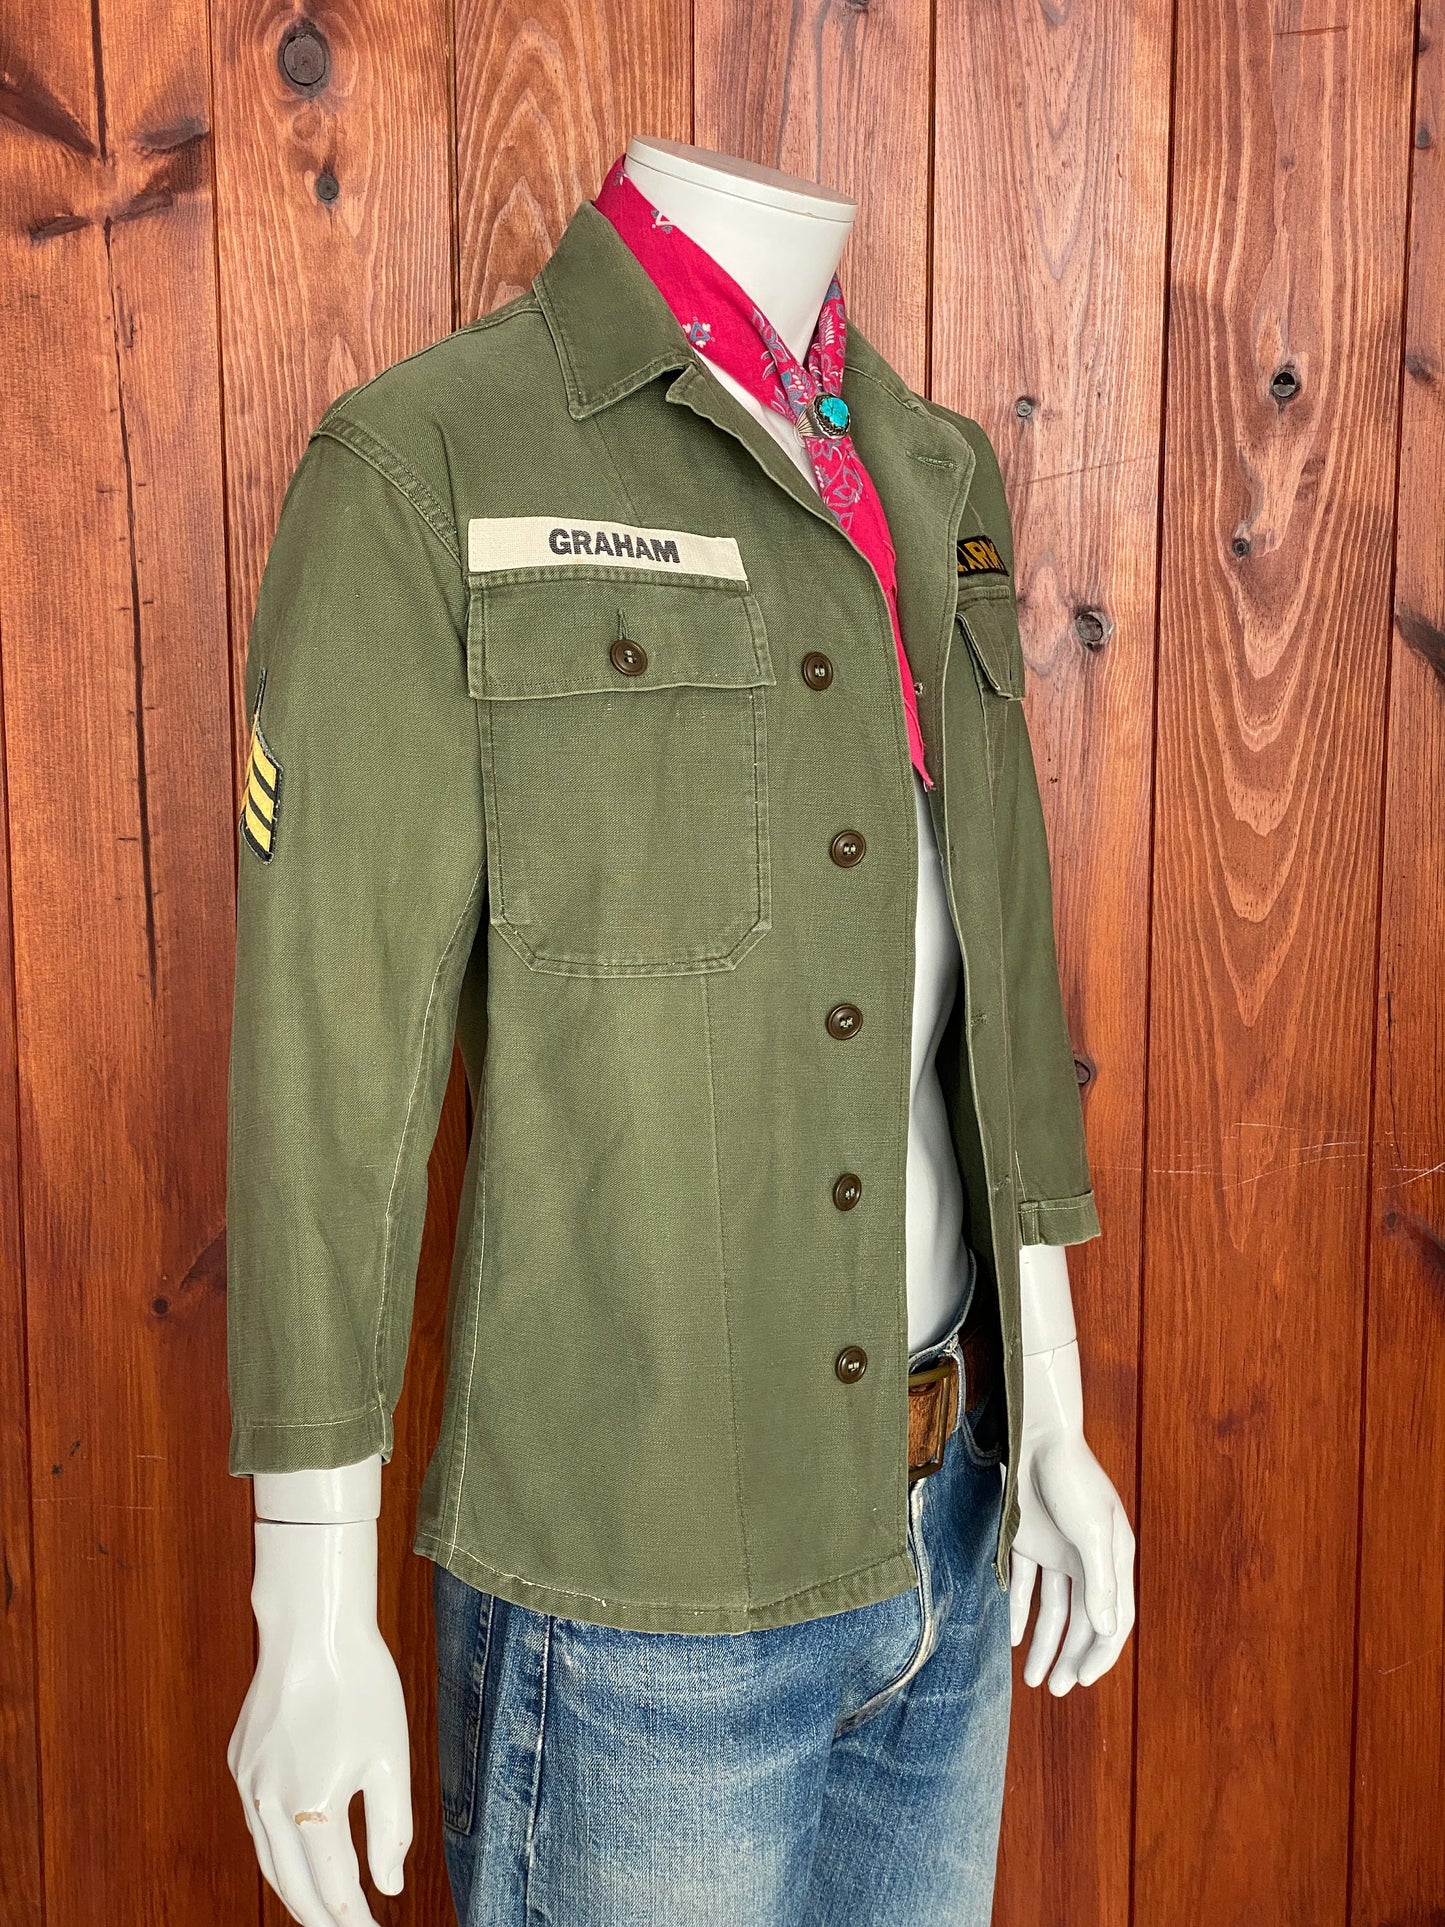 Small. Authentic 60s US Army Type I vintage OG-107 fatigue shirt.